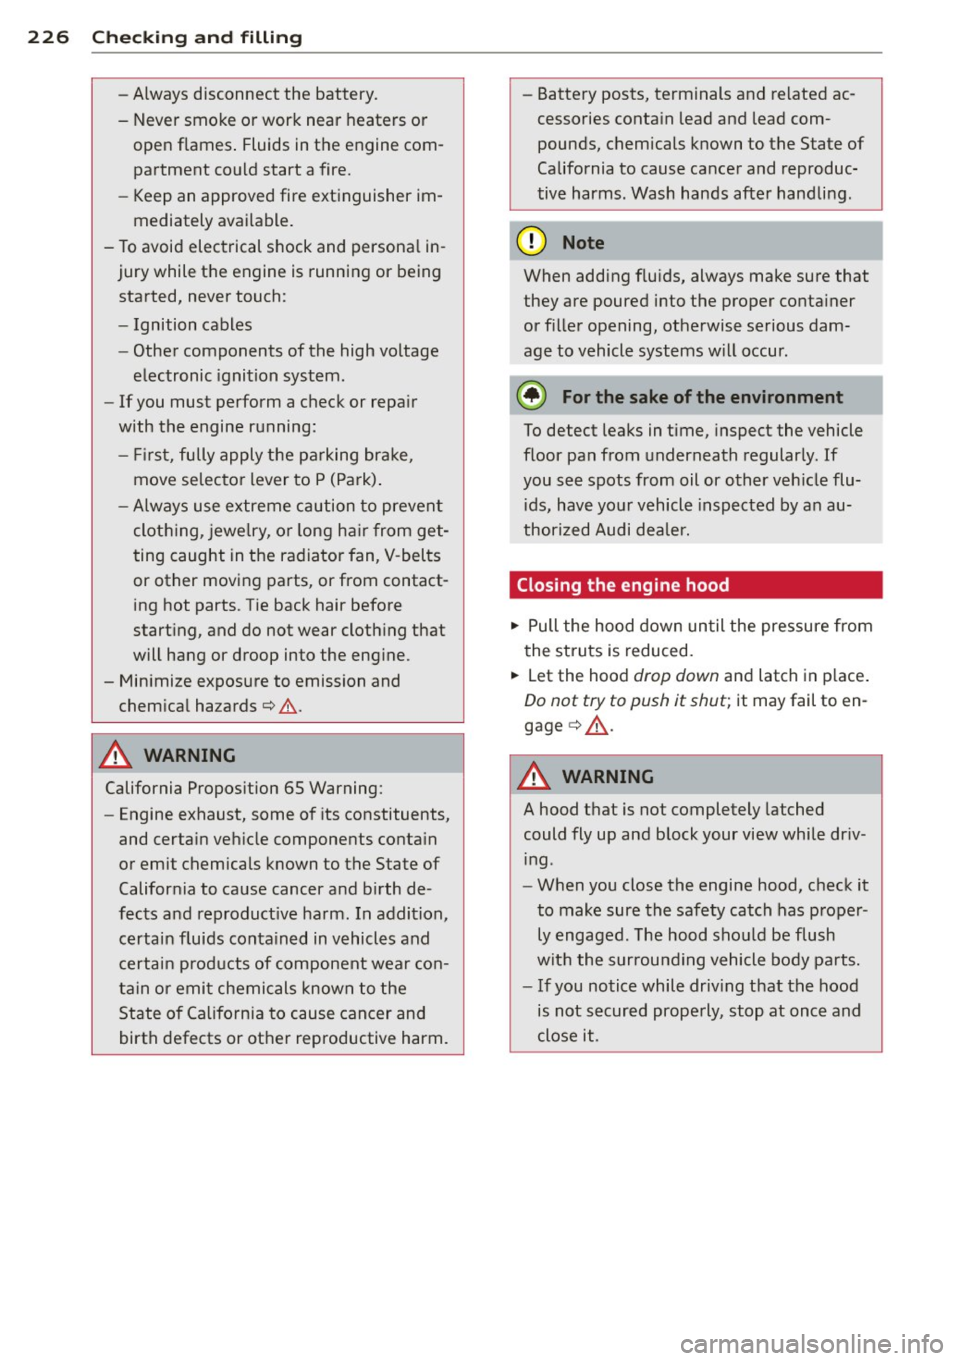 AUDI A6 2013  Owners Manual 226  Check ing  and  filling 
- Always  disconnect  the  battery. 
- Never  smoke  or work  near  heaters  or  open  flames . Fluids  in the  engine  com­
partment  could  start  a fire. 
- Keep  an 